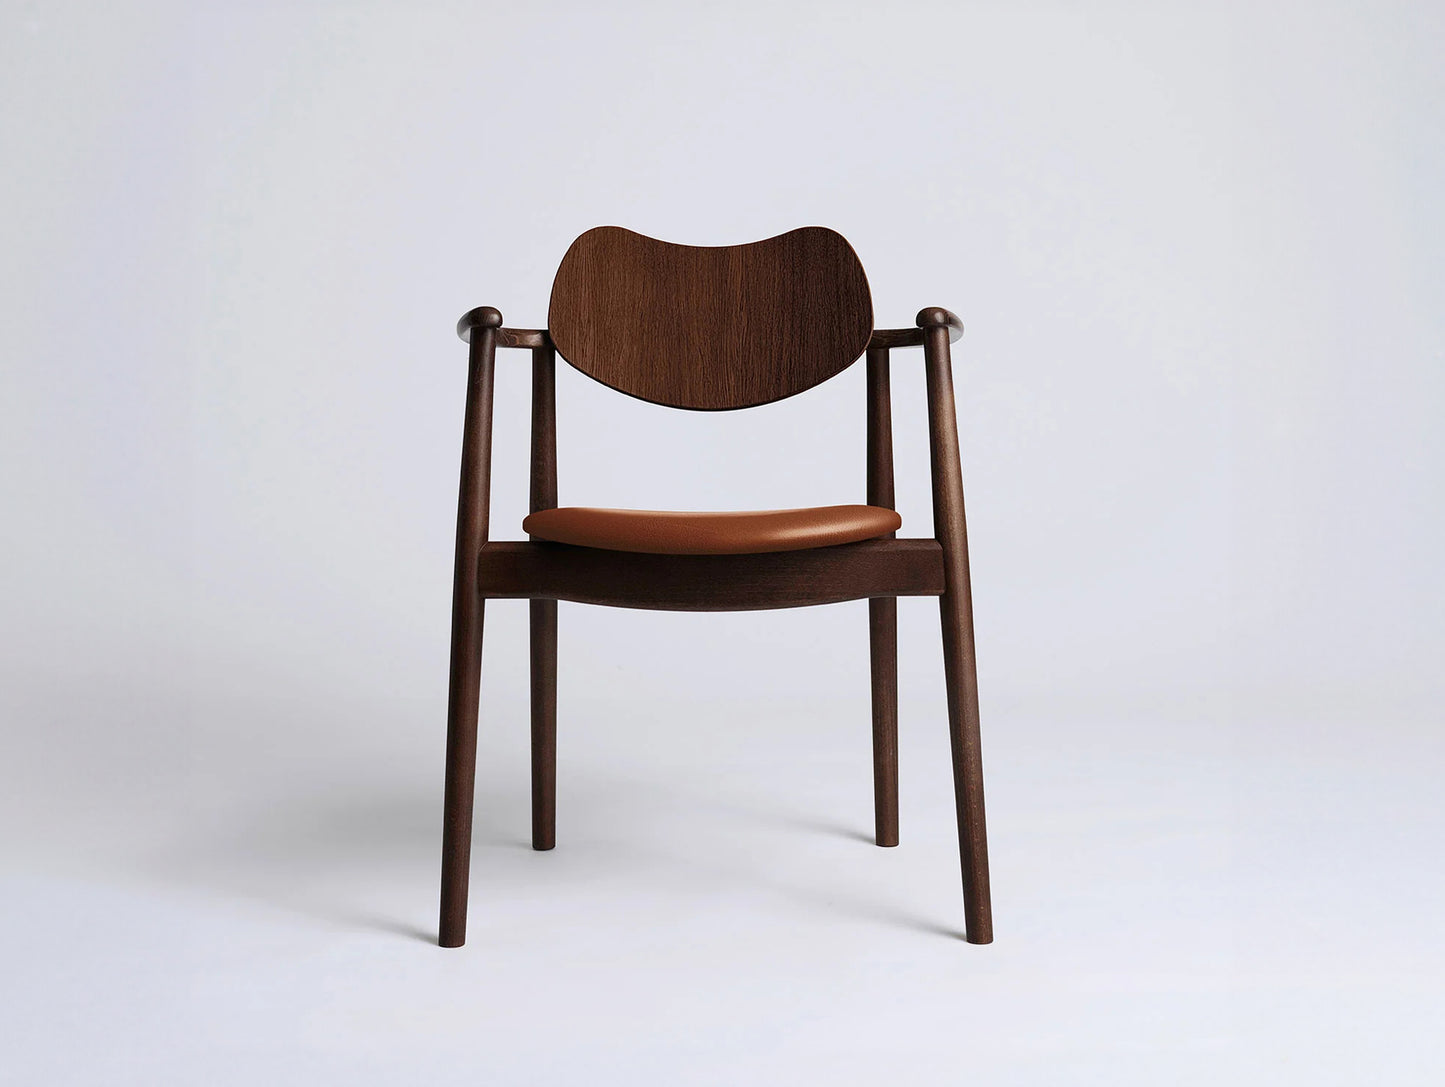 Regatta Chair Seat Upholstered by Ro Collection - Walnut Stained Beech / Exclusive Cognac Leather